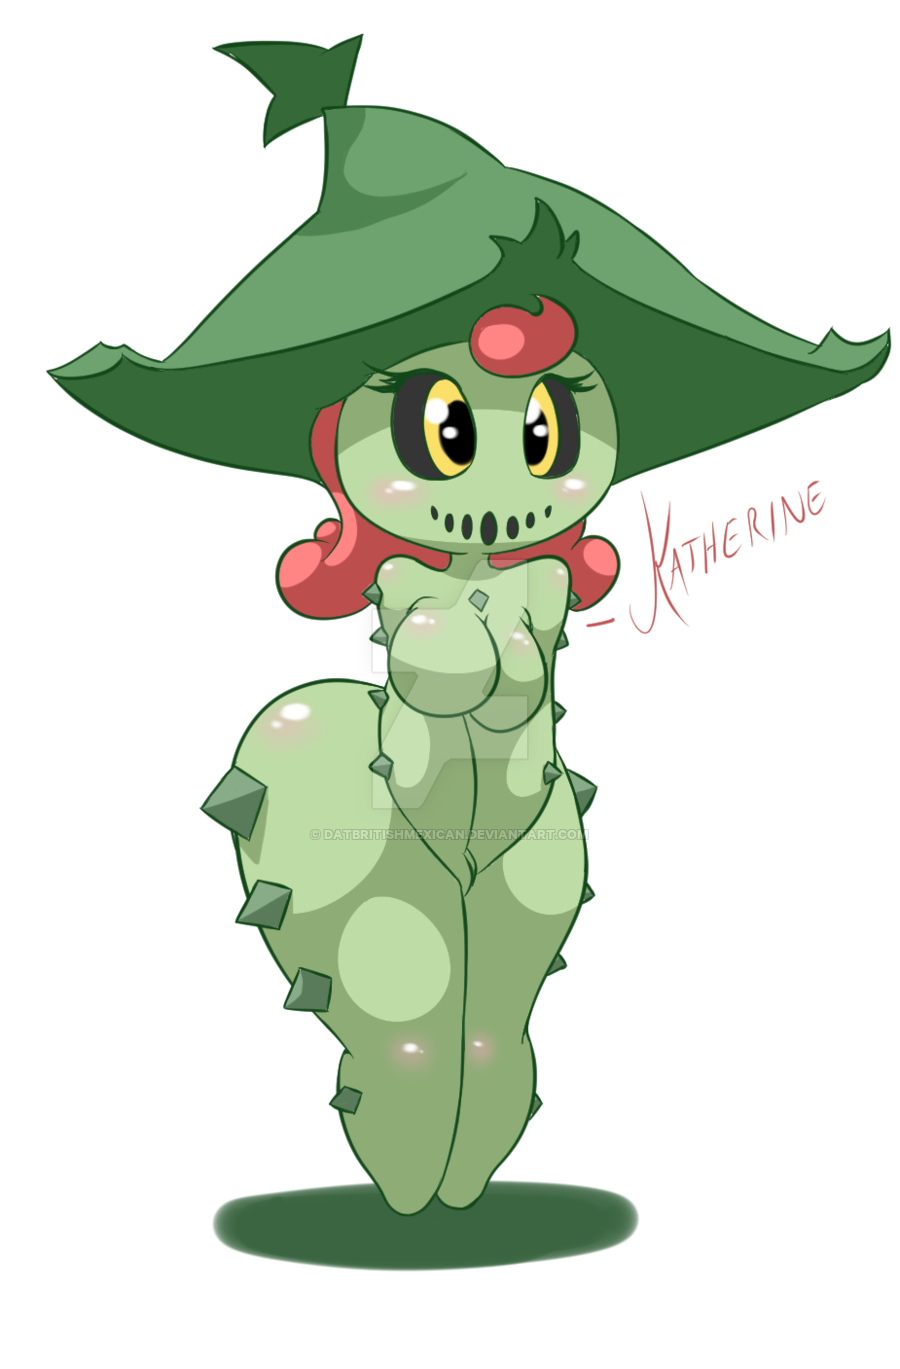 Katherine the Cacturne by DatBritishMexican on DeviantArt